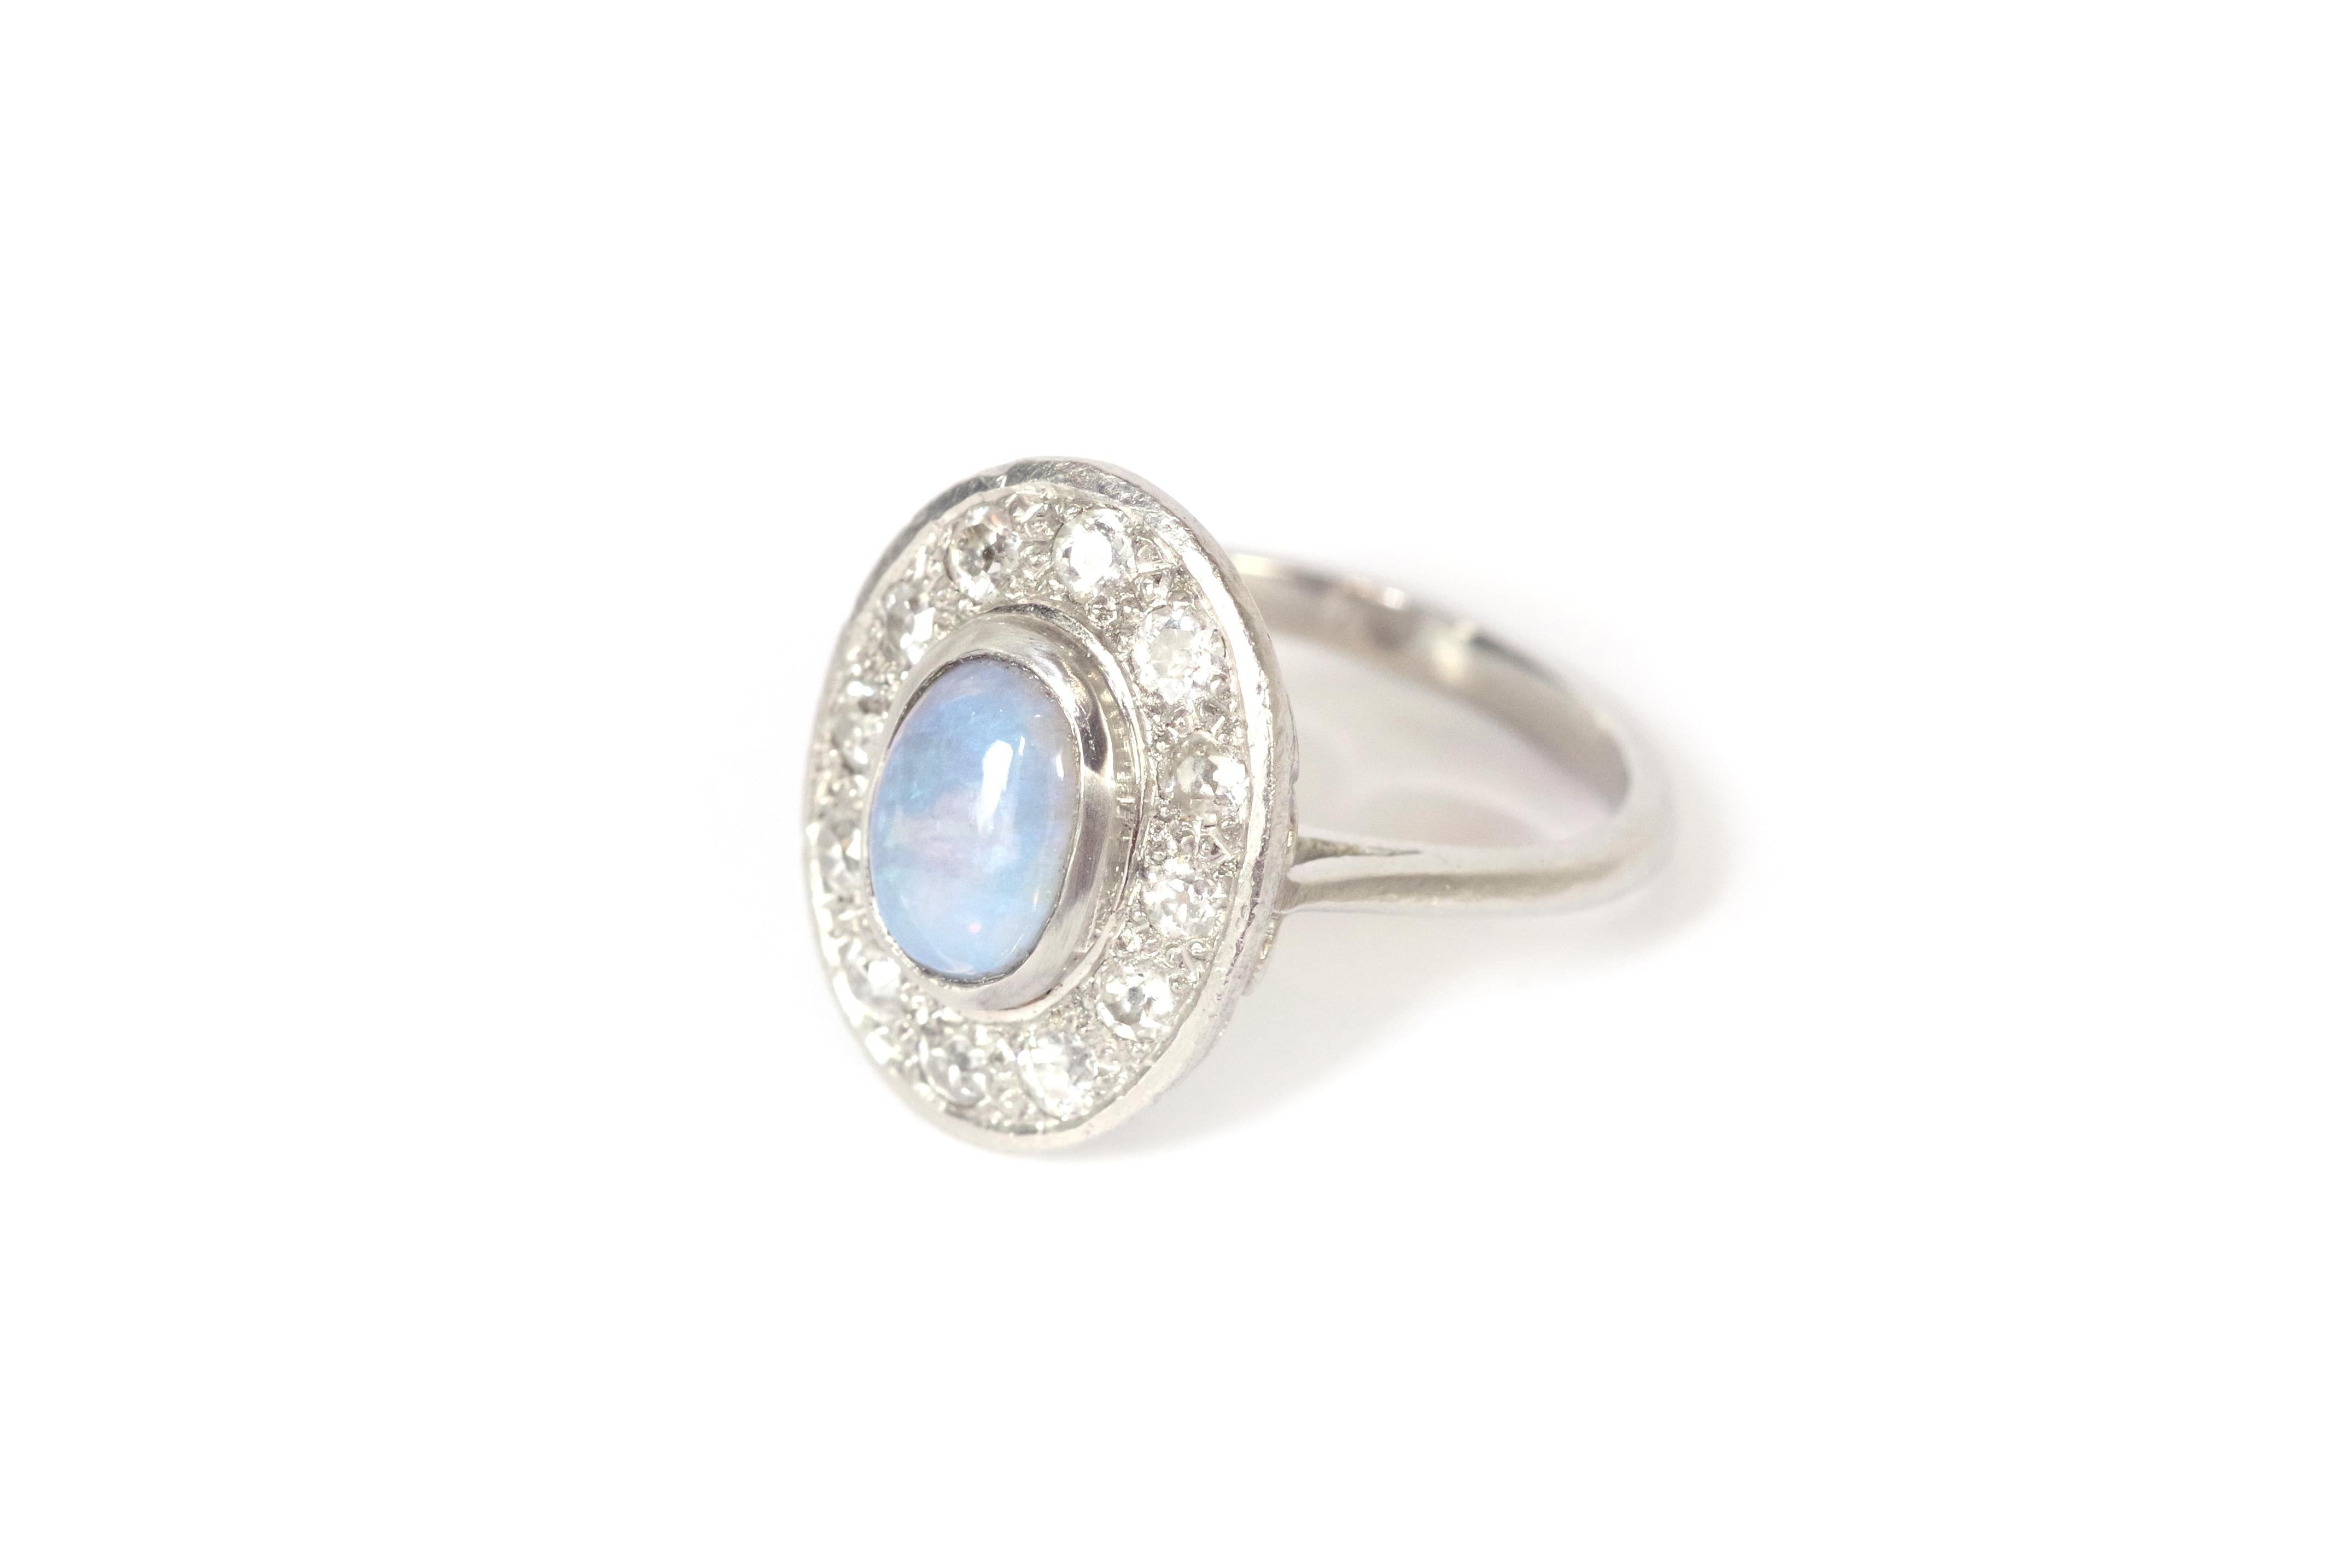 Art Deco cluster opal ring in platinum. This antique cluster ring features a central cabochon-cut opal set in a close setting, surrounded by twelve old-cut diamonds. The opal shows vibrant play-of-color with shades of violet, blue, and green,